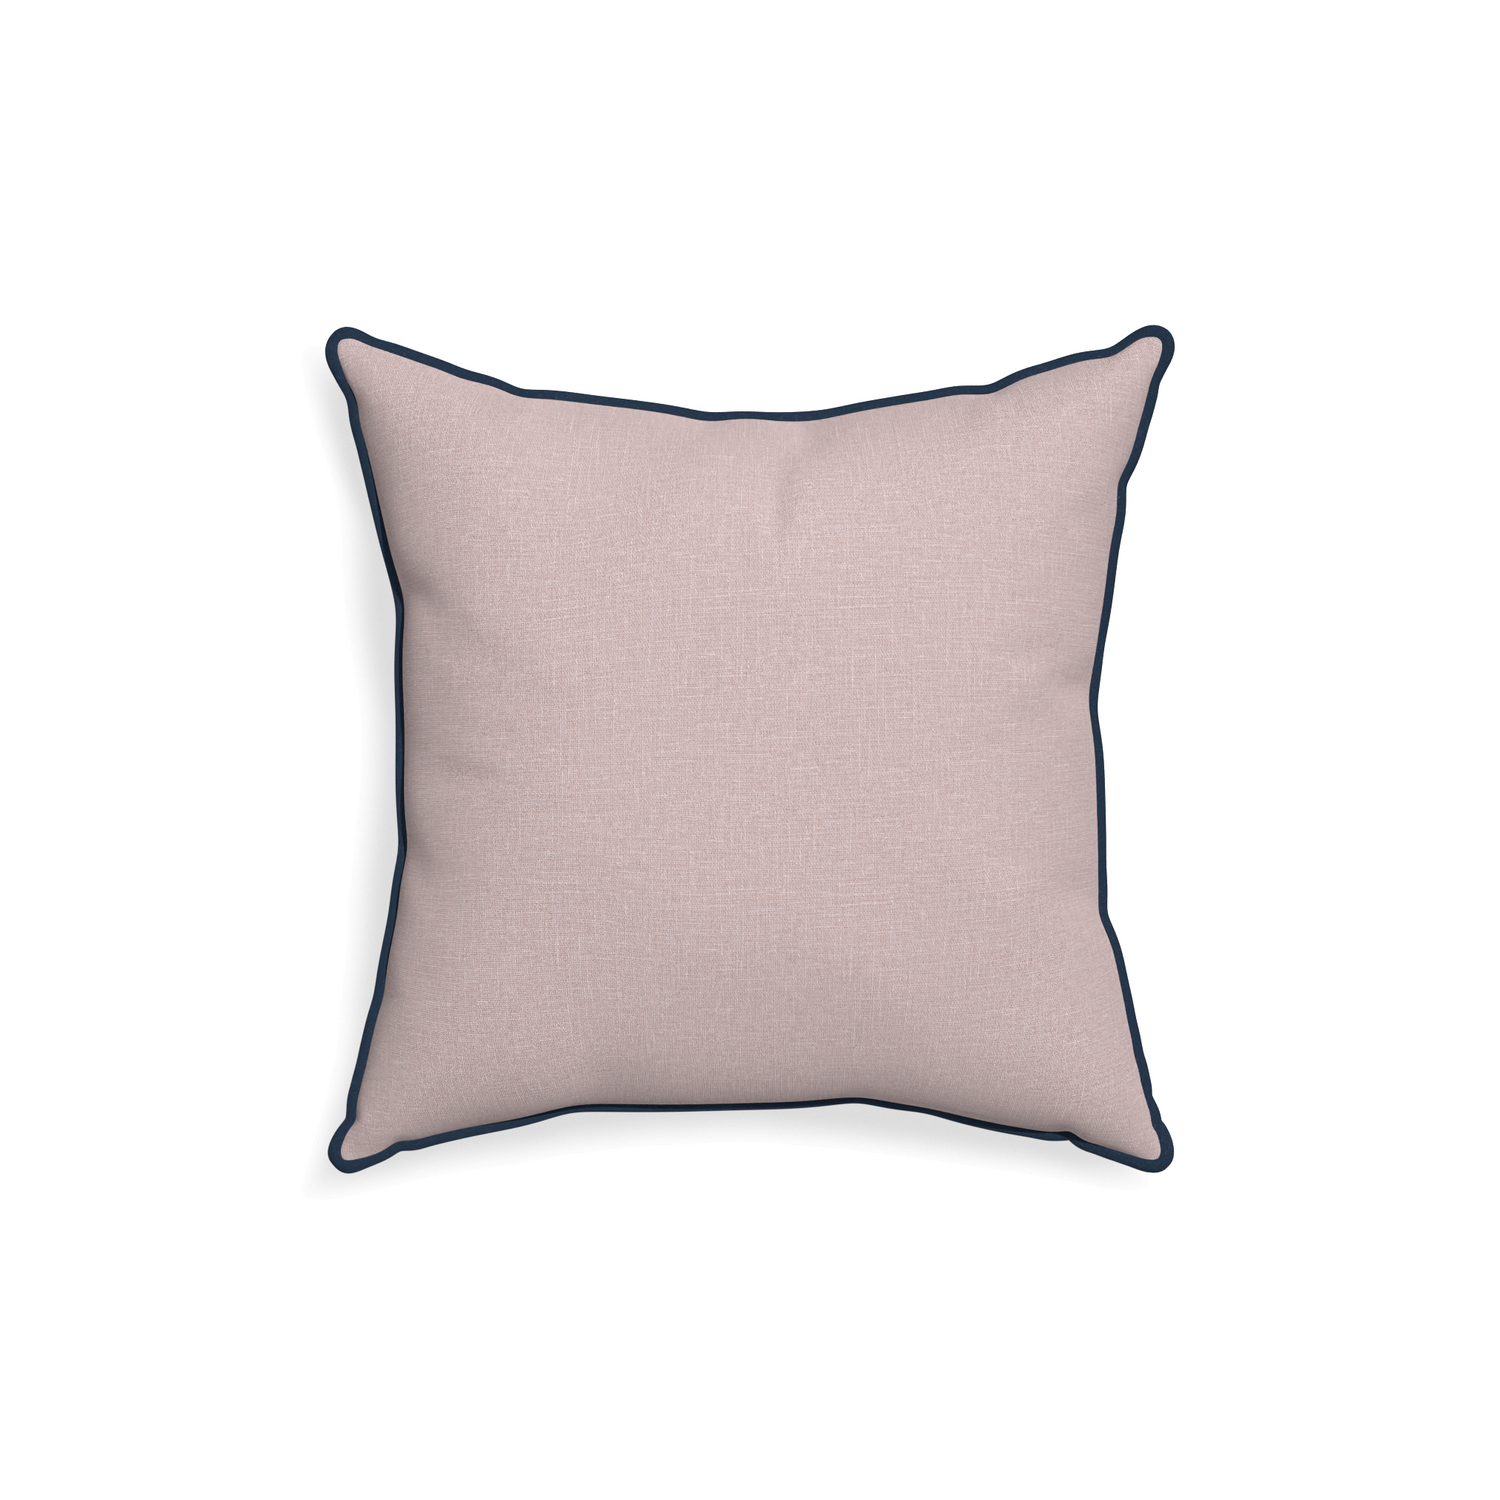 18-square orchid custom mauve pinkpillow with c piping on white background